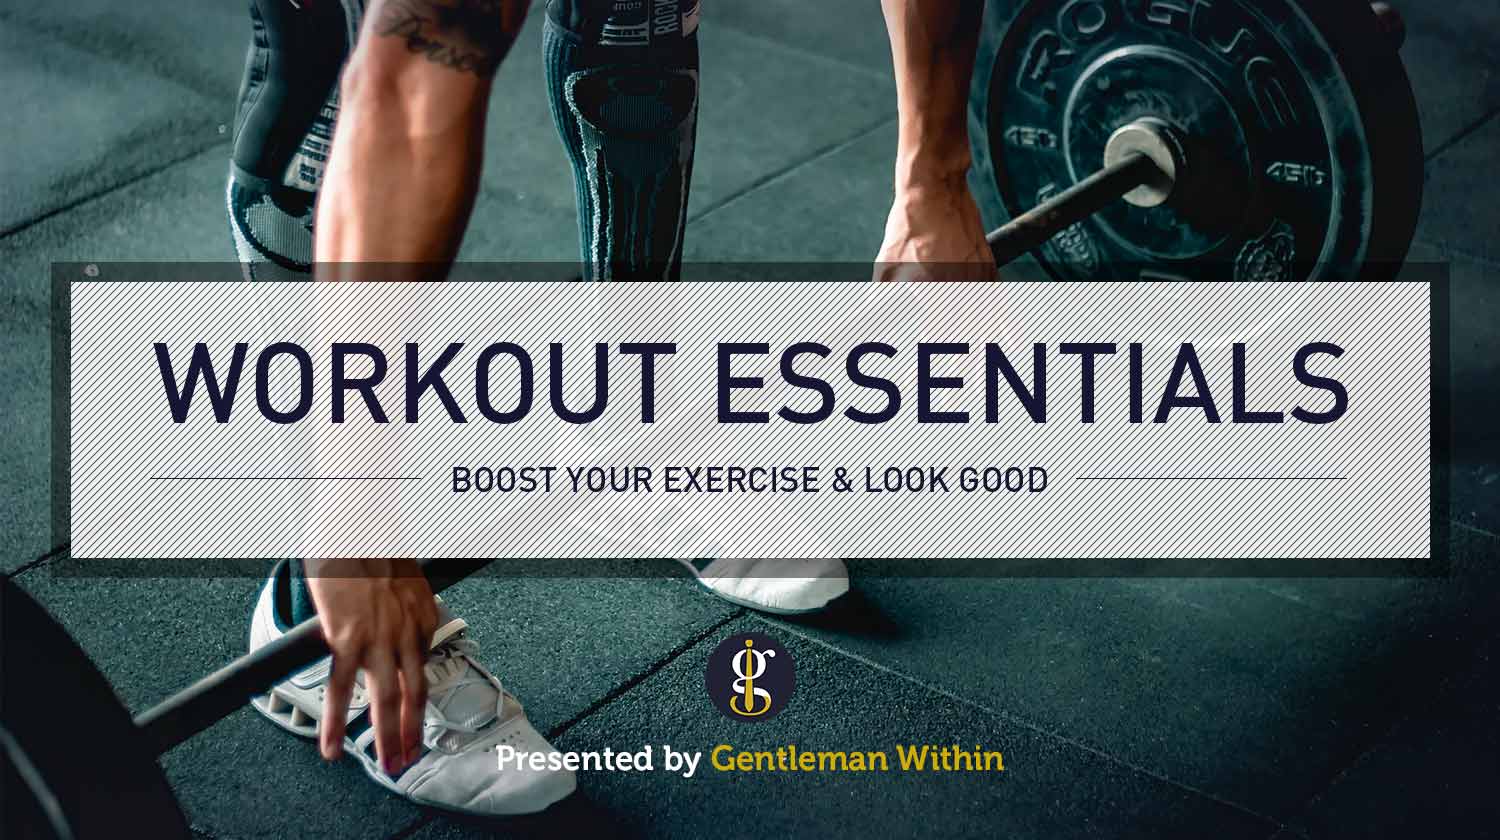 Gym Essentials to Boost Your Exercise and Look Good | GENTLEMAN WITHIN